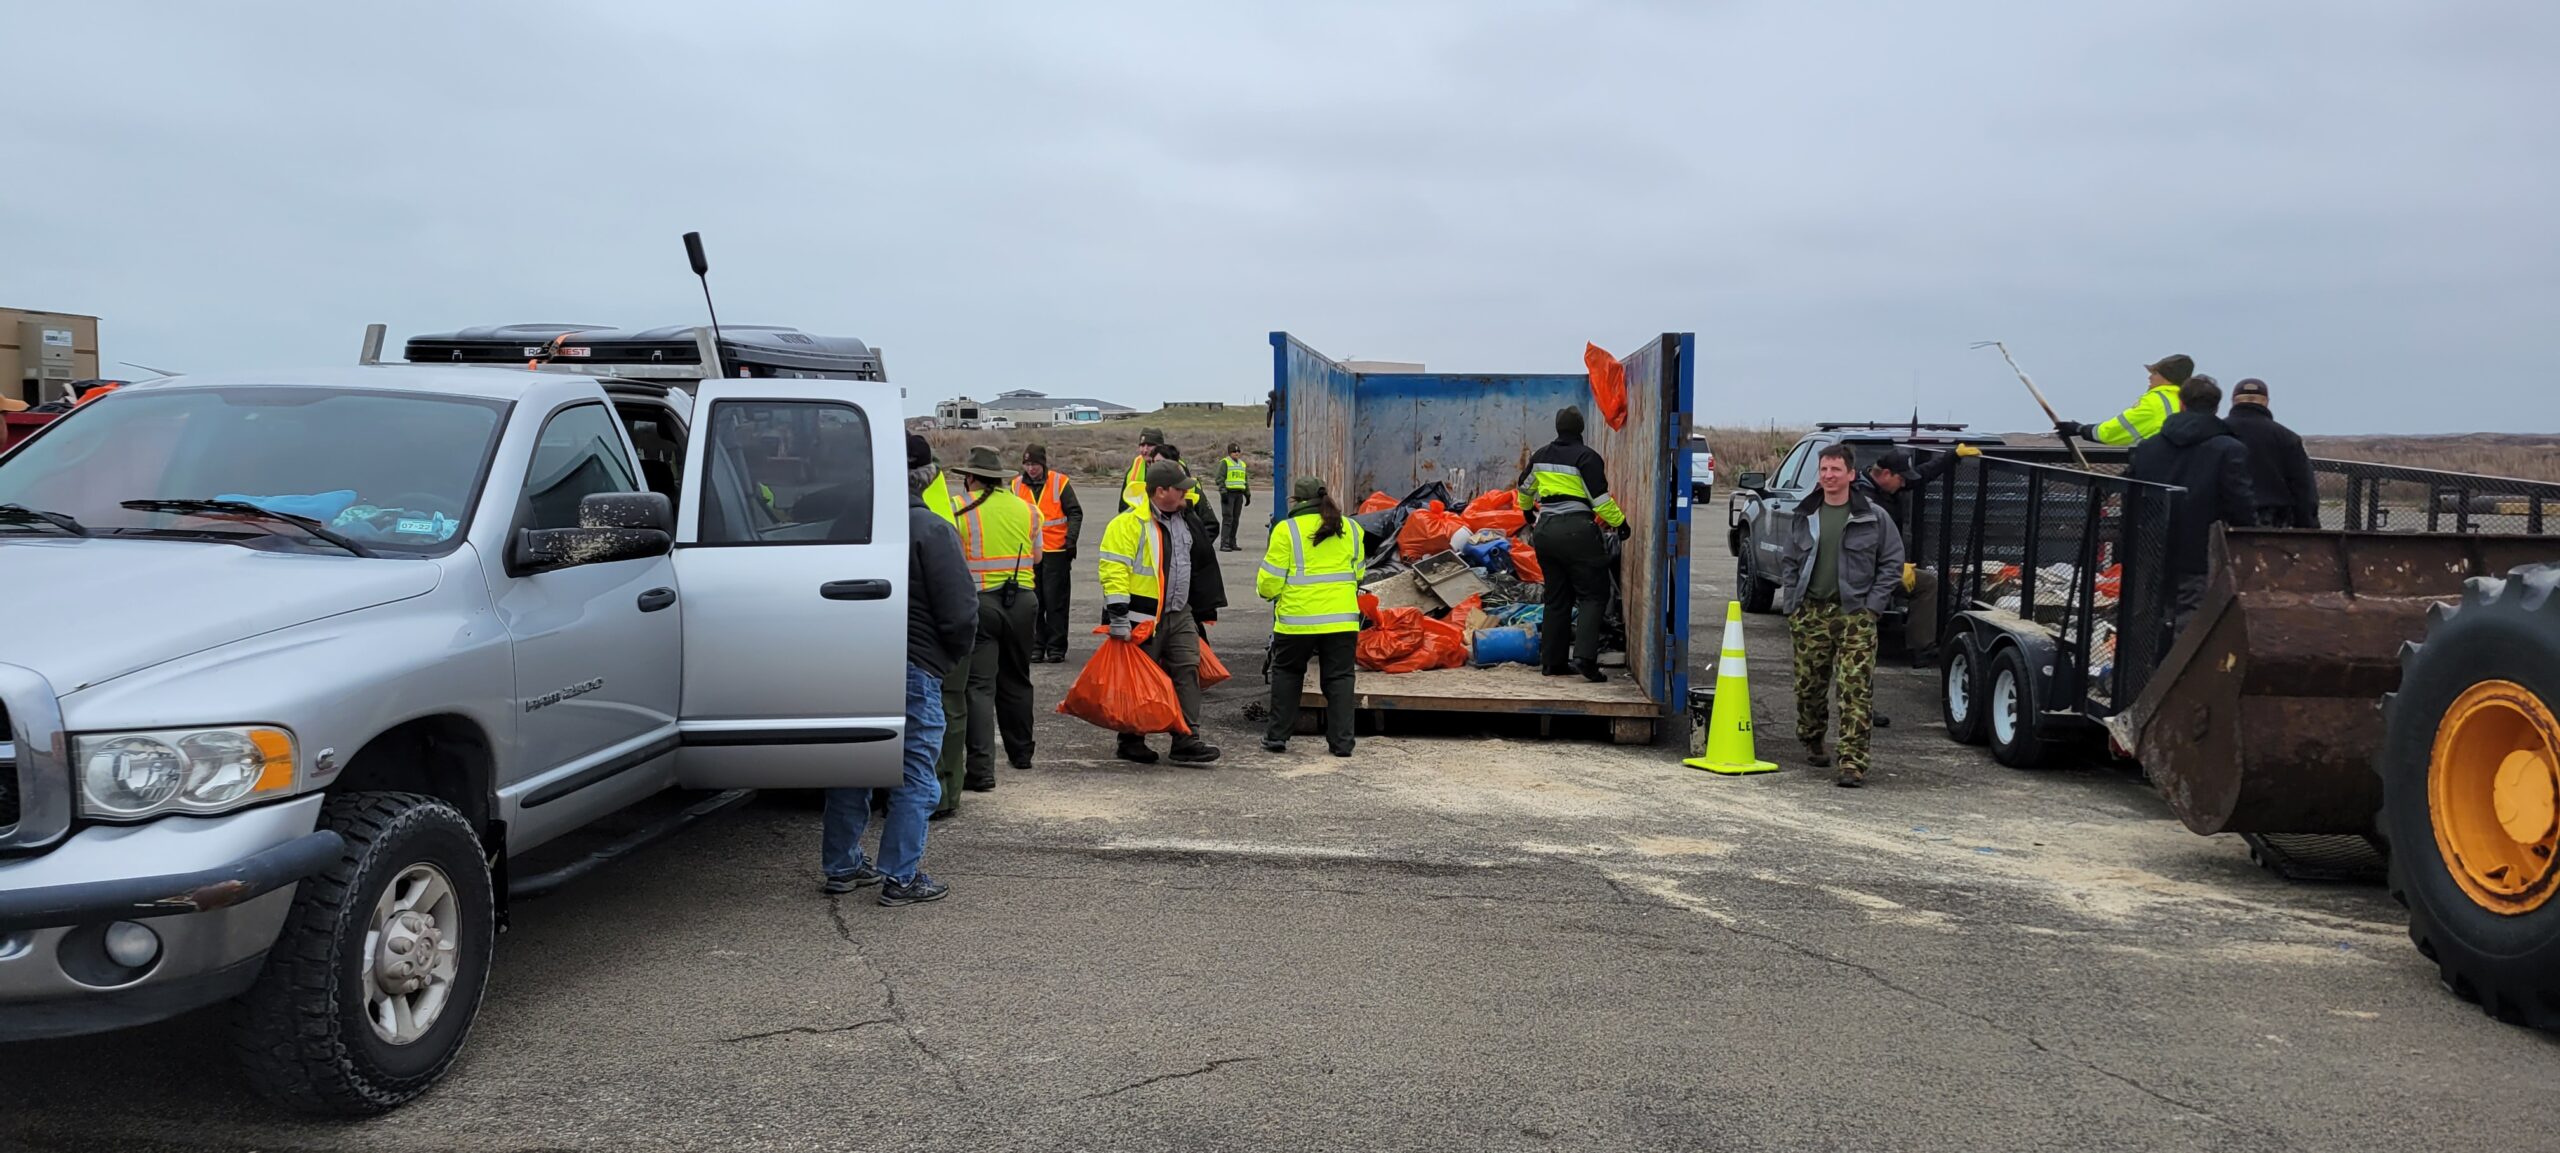 27th annual Captain Billy Sandifer Big Shell Beach Clean up - unloading the trash from volunteers' trucks and trailers into dumpsters for proper disposal